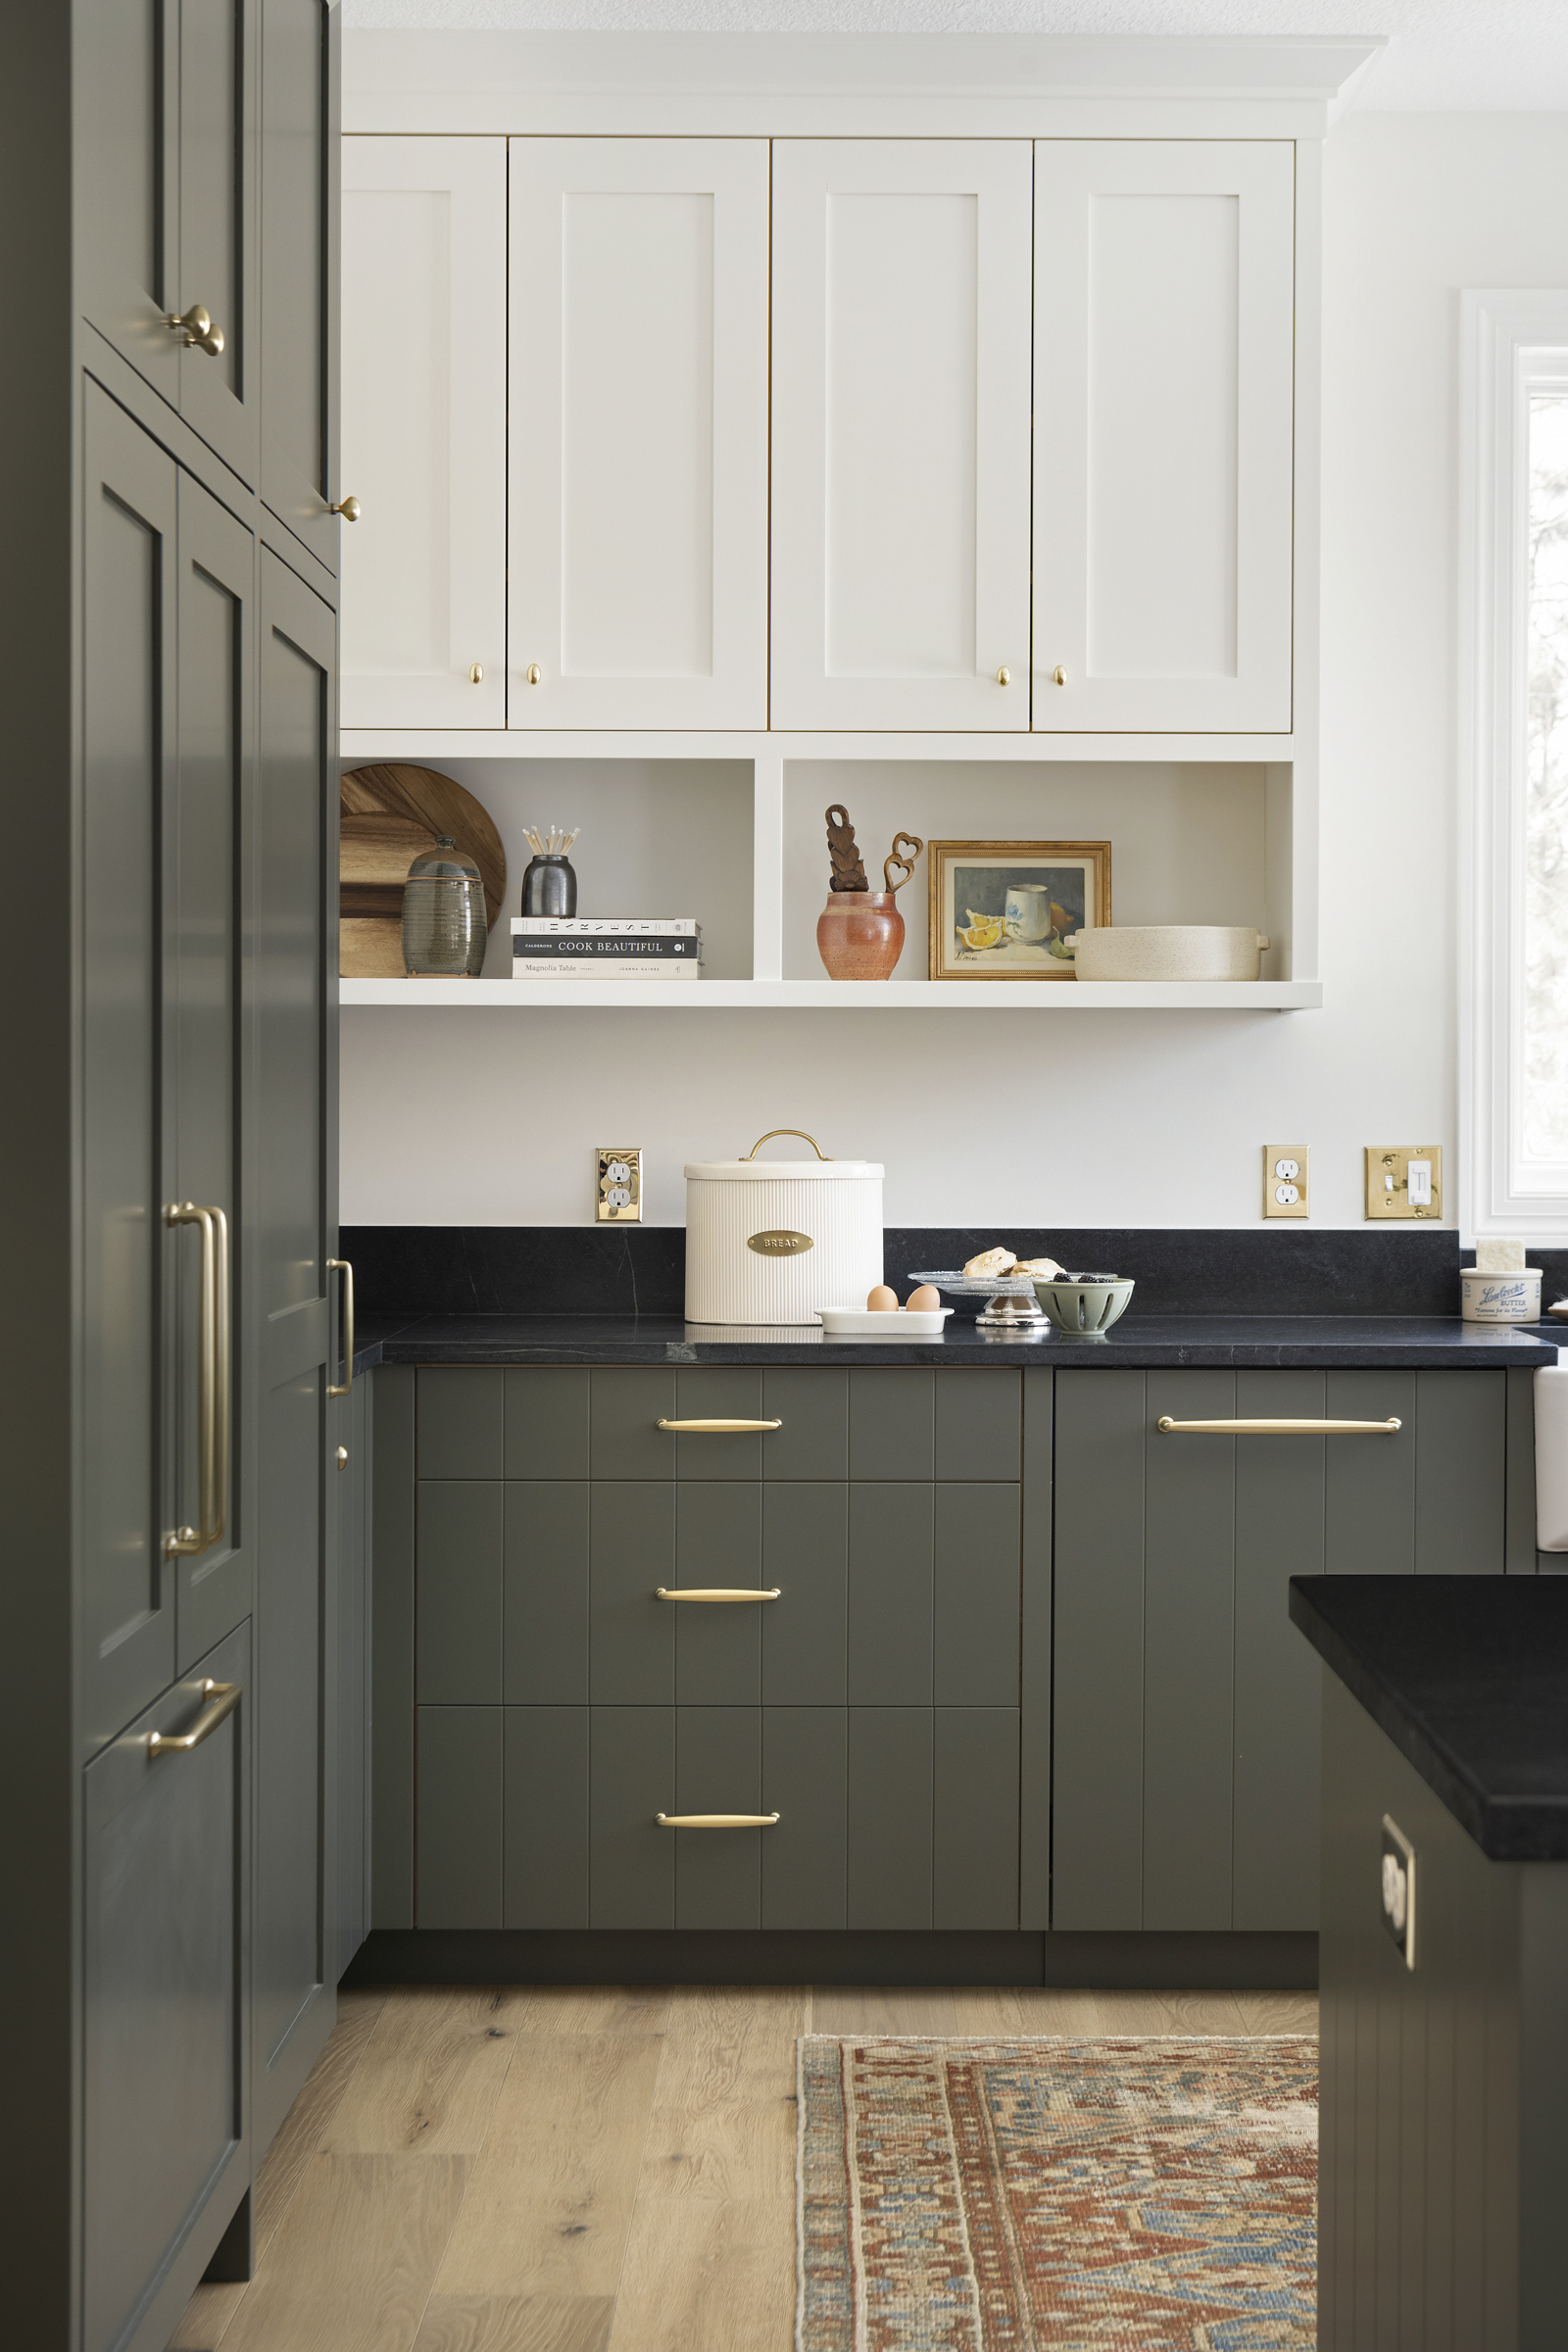 Twin Cities kitchen renovation with green and white cabinets, soapstone countertops, and brass hardware.